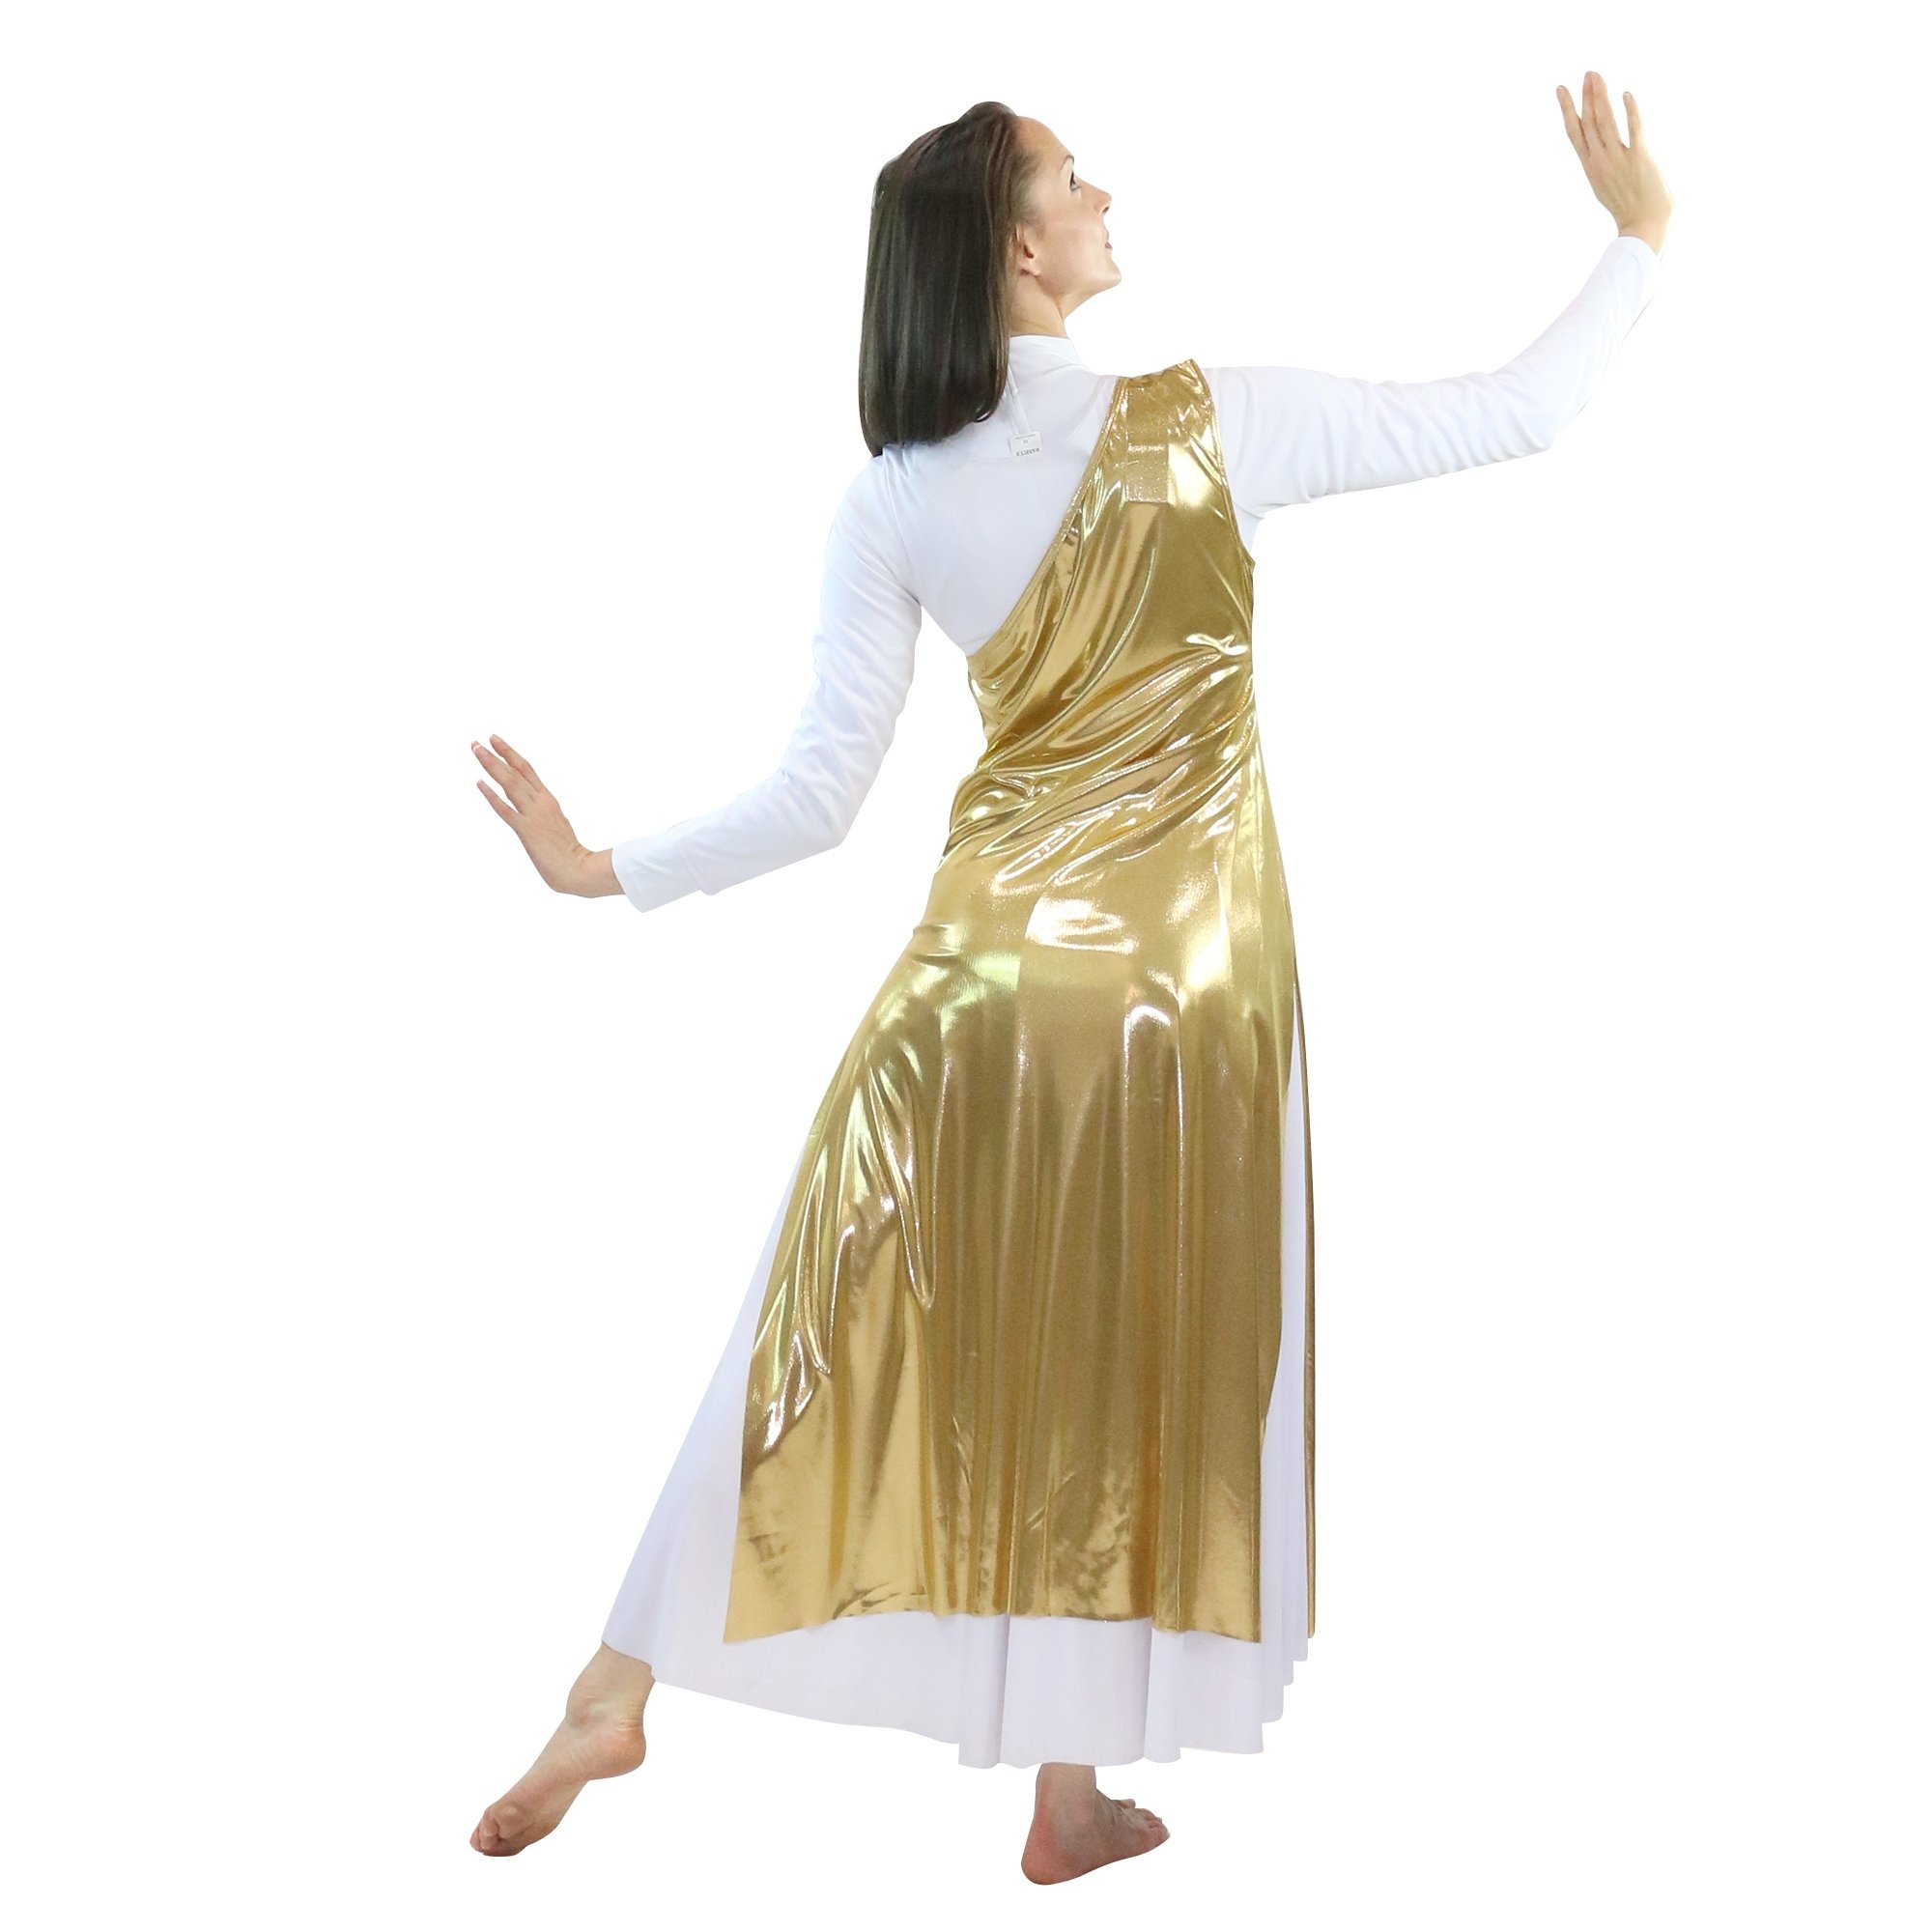 Danzcue Worship Dance Tunic with Side Slits(white dress not included) - Click Image to Close